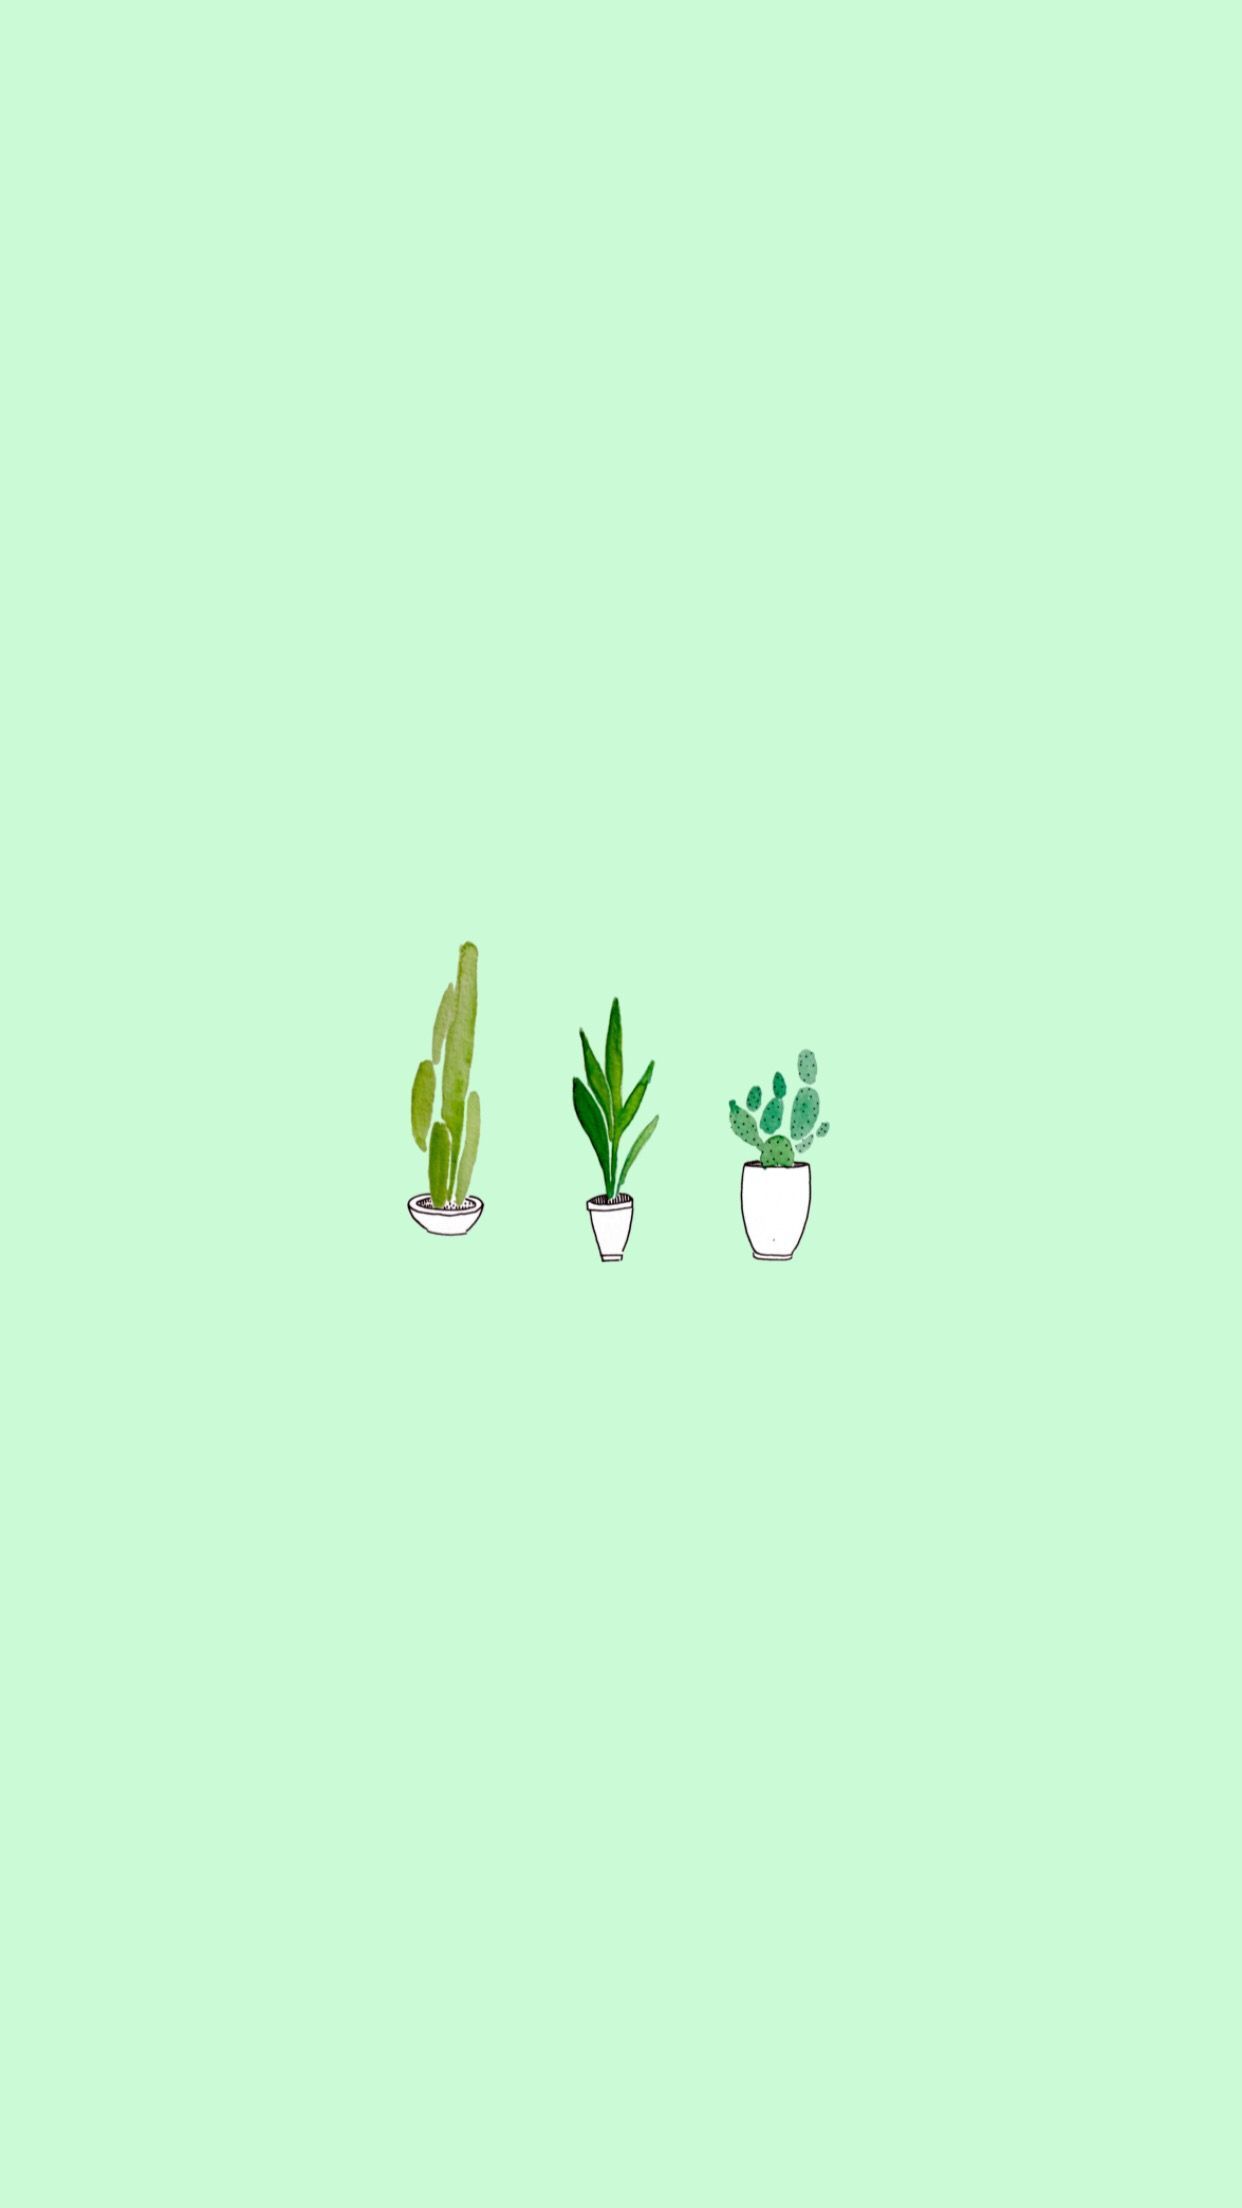 A cactus, succulent and plant on green background - Lime green, light green, green, soft green, pastel green, plants